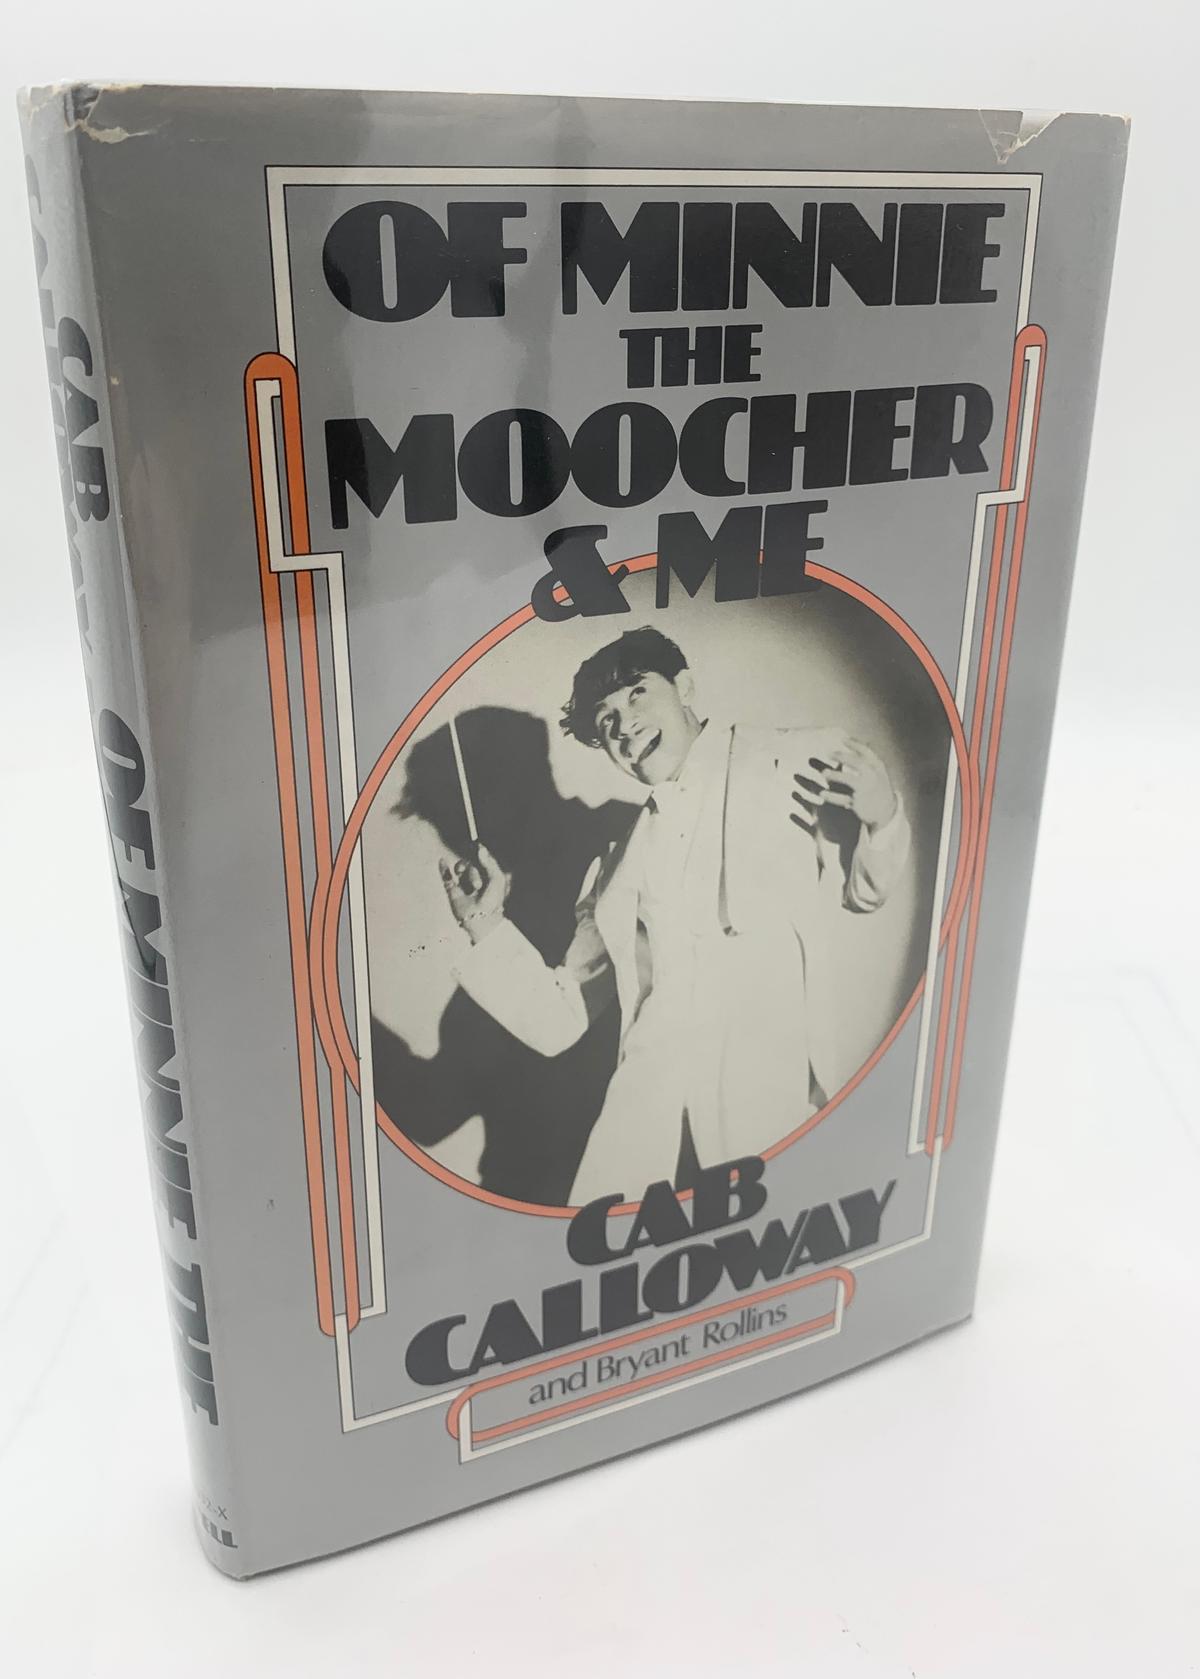 SIGNED CAB CALLOWAY Of Minnie the Moocher & Me (1976)